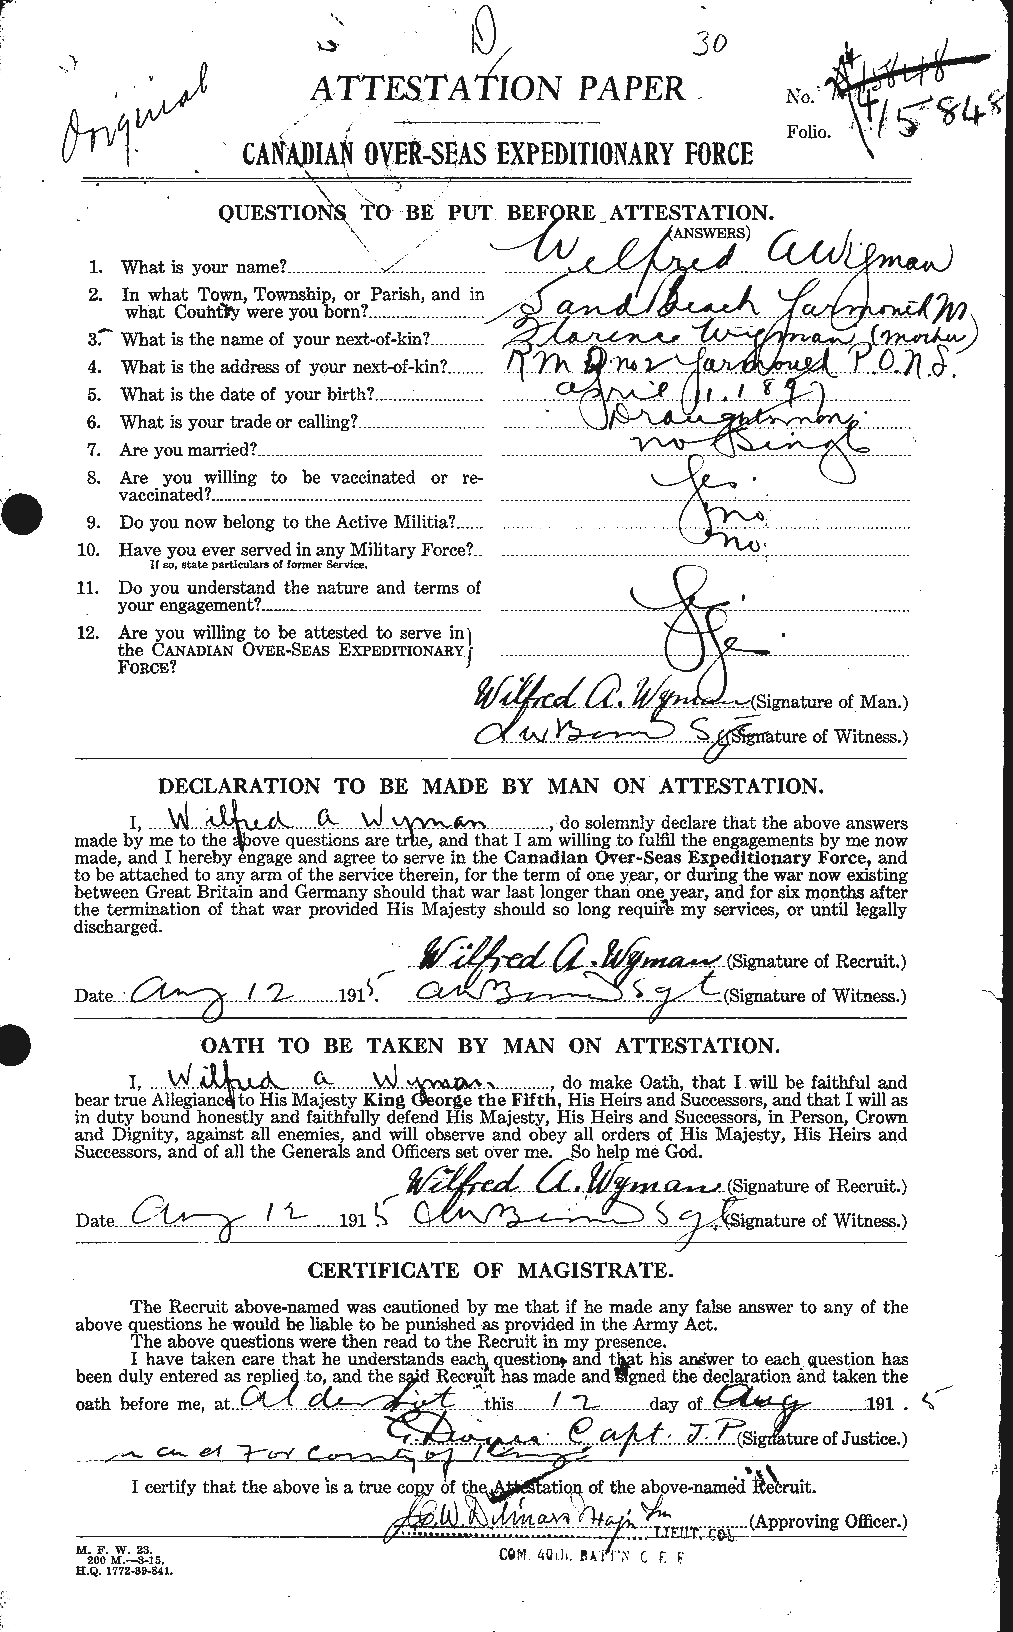 Personnel Records of the First World War - CEF 686861a